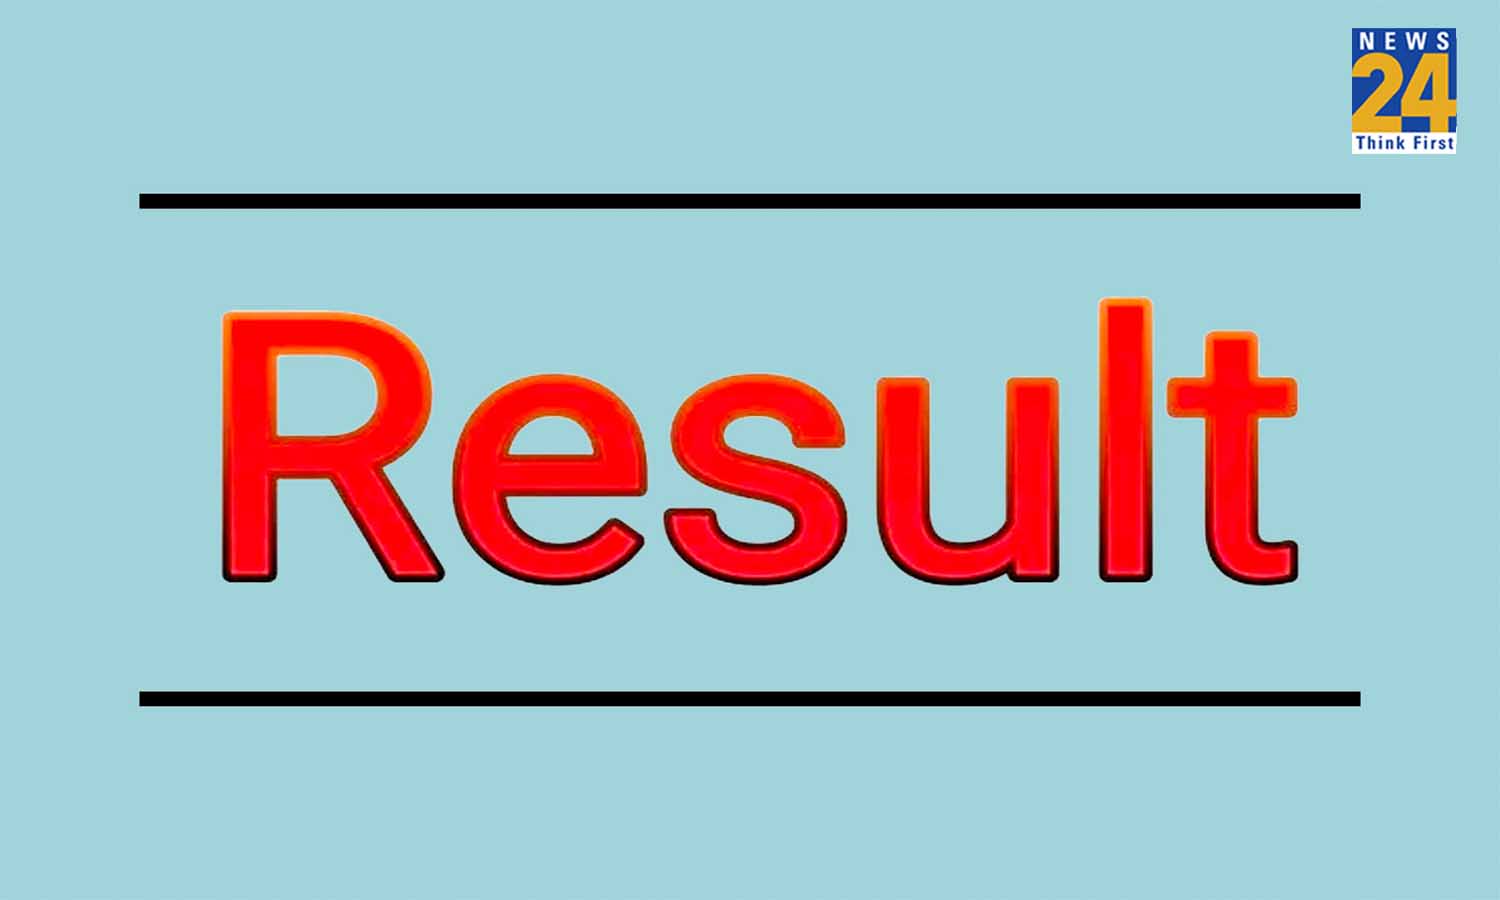 BPSC 67th Preliminary exam result expected to be out on THIS date